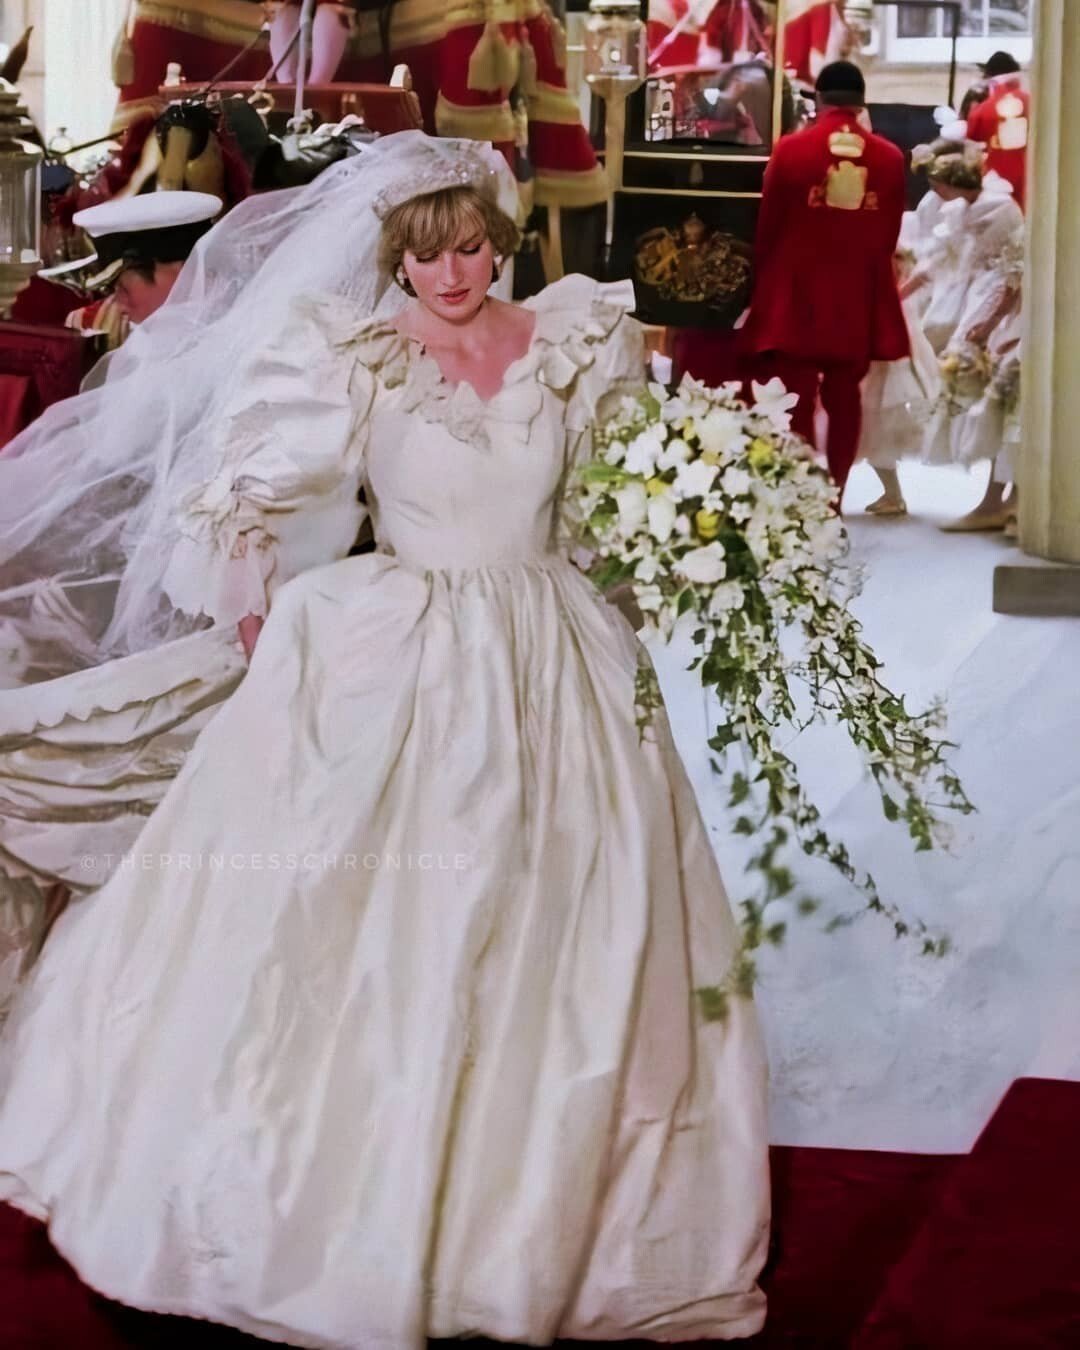 Most princesses have chosen to incorporate myrtle in their wedding bouquet, including Princess Diana (above), Kate Middleton, Meghan Markle, Sarah Ferguson, Princess Eugenie, and Princess Beatrice. Photo: @theprincesschronicle/ Instagram